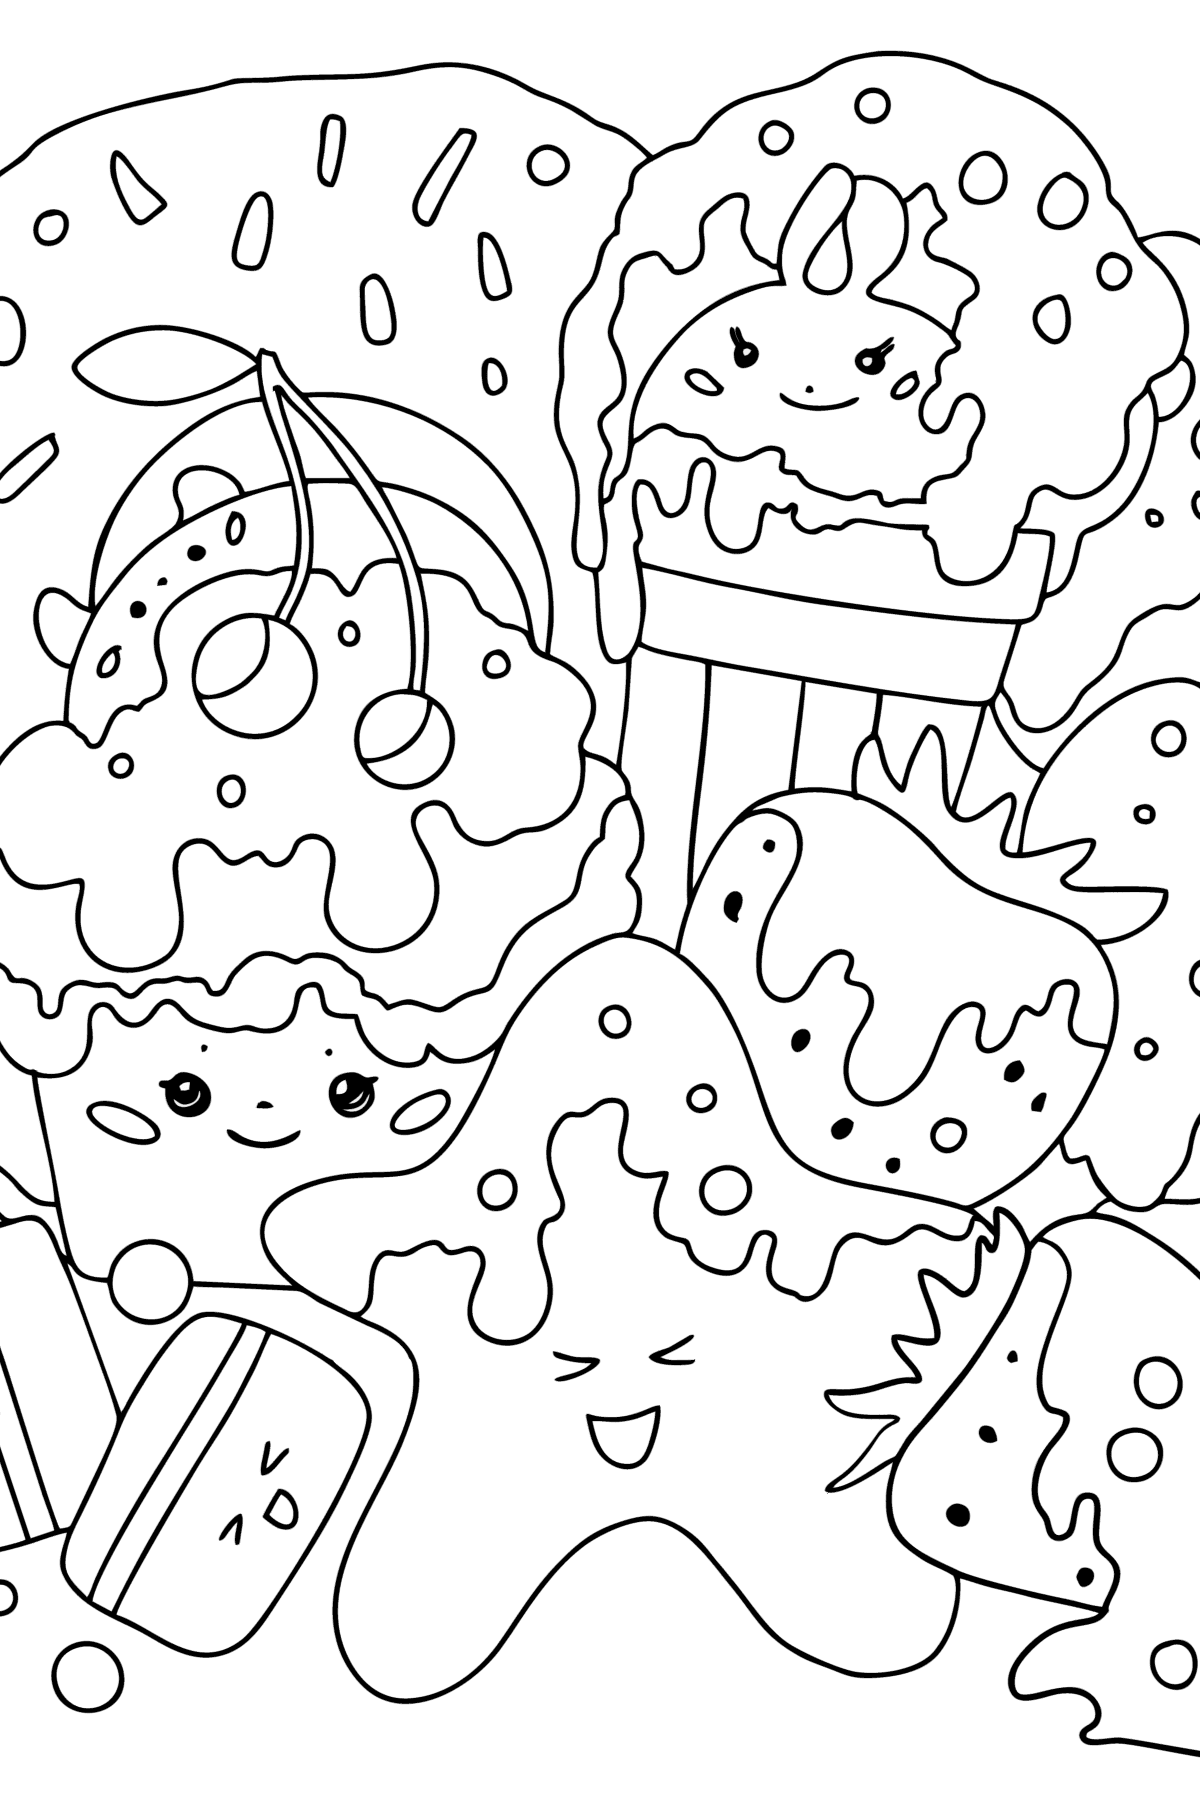 41 necessary how to draw kawaii food food coloring pages cute coloring